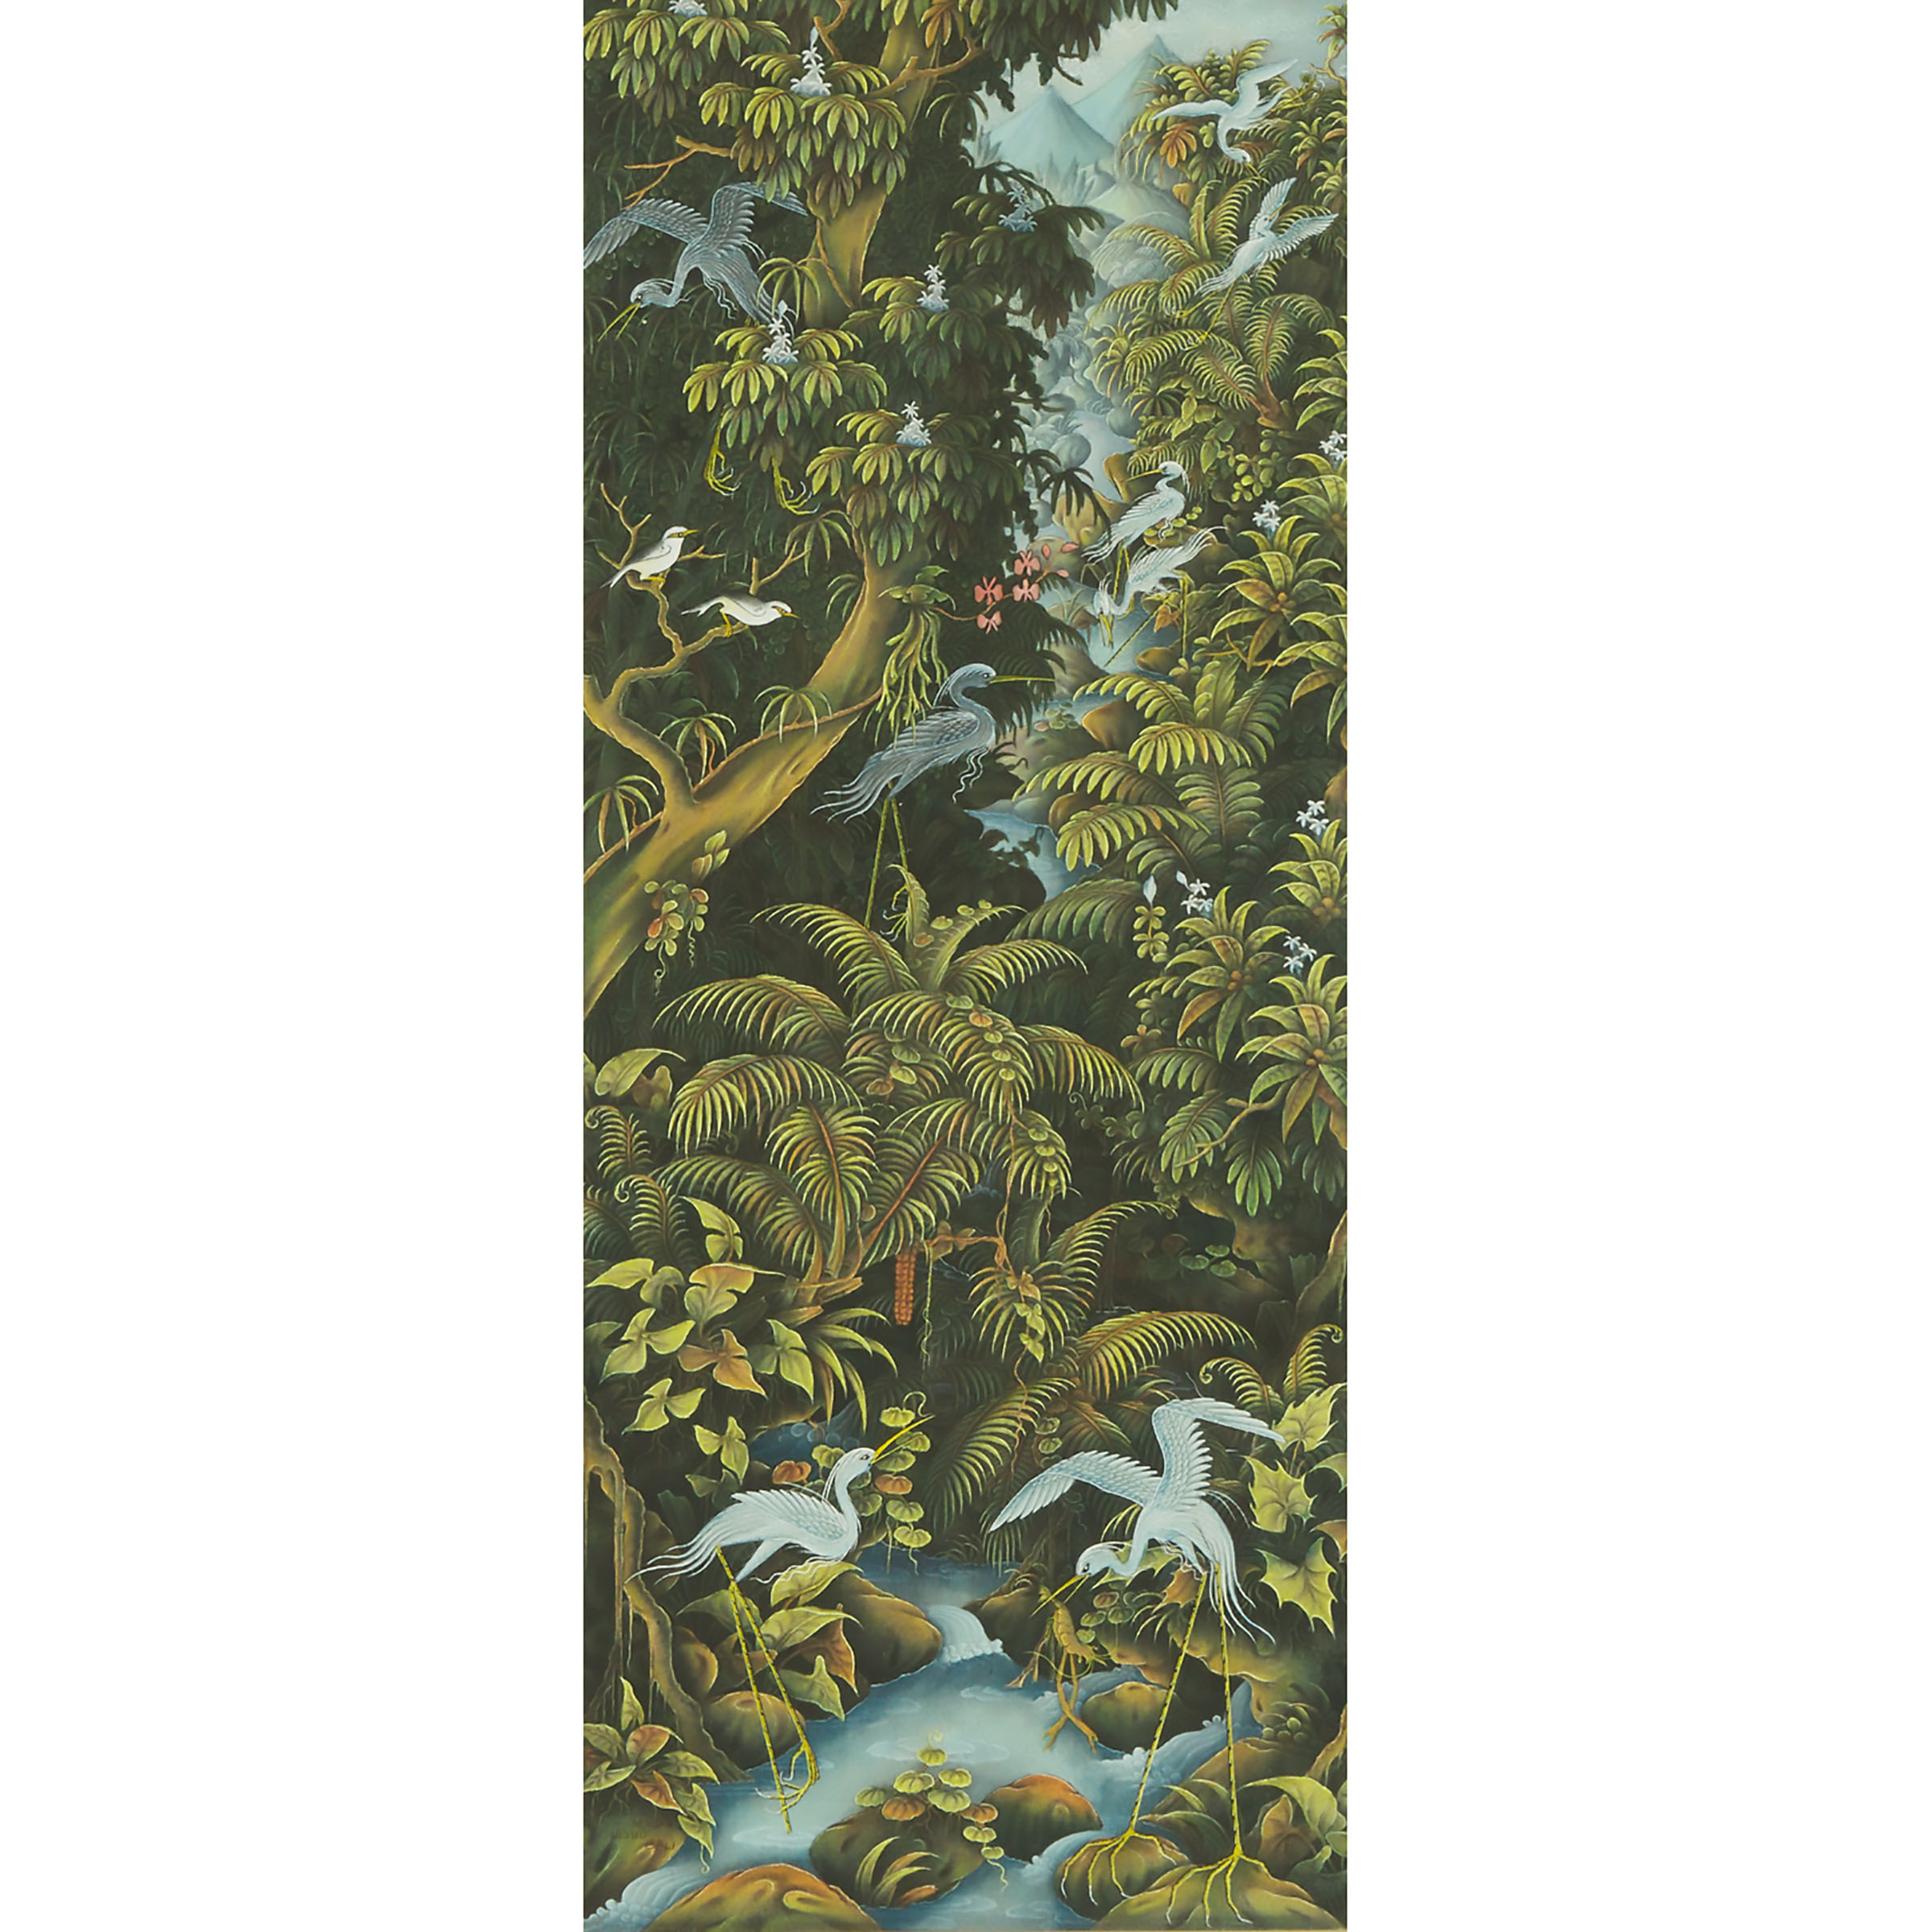 A Balinese Painting of Birds of Paradise, 20th Century